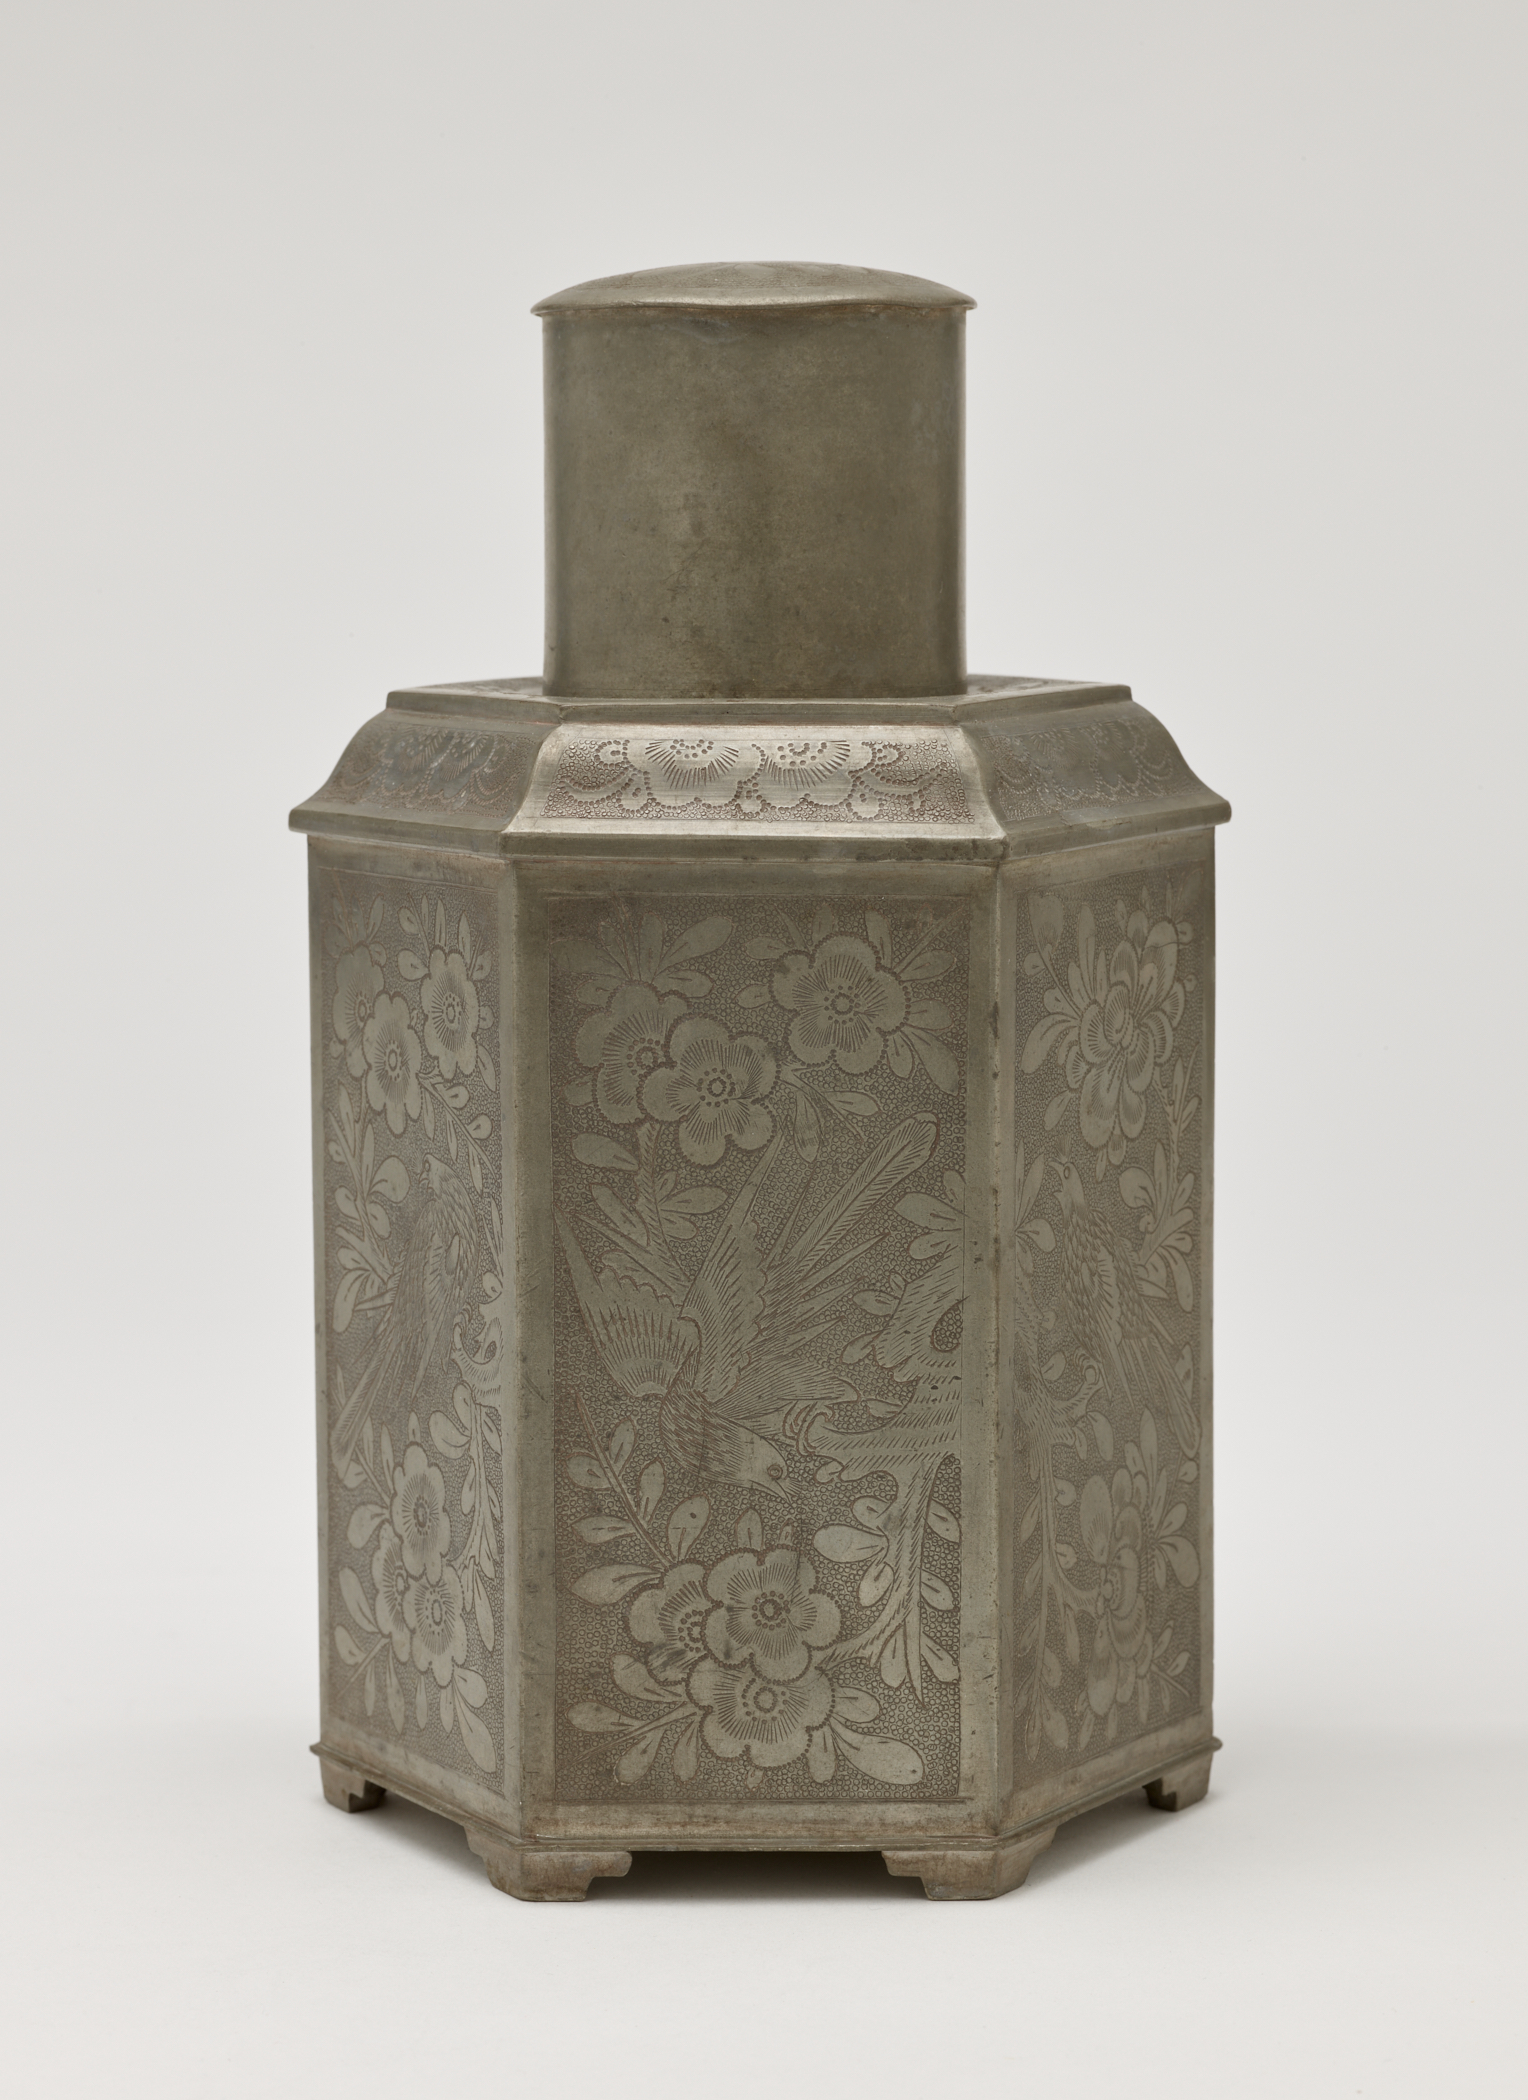 /A%20pentagonal%20pewter%20tea%20caddy%20with%20floral%20decorations.